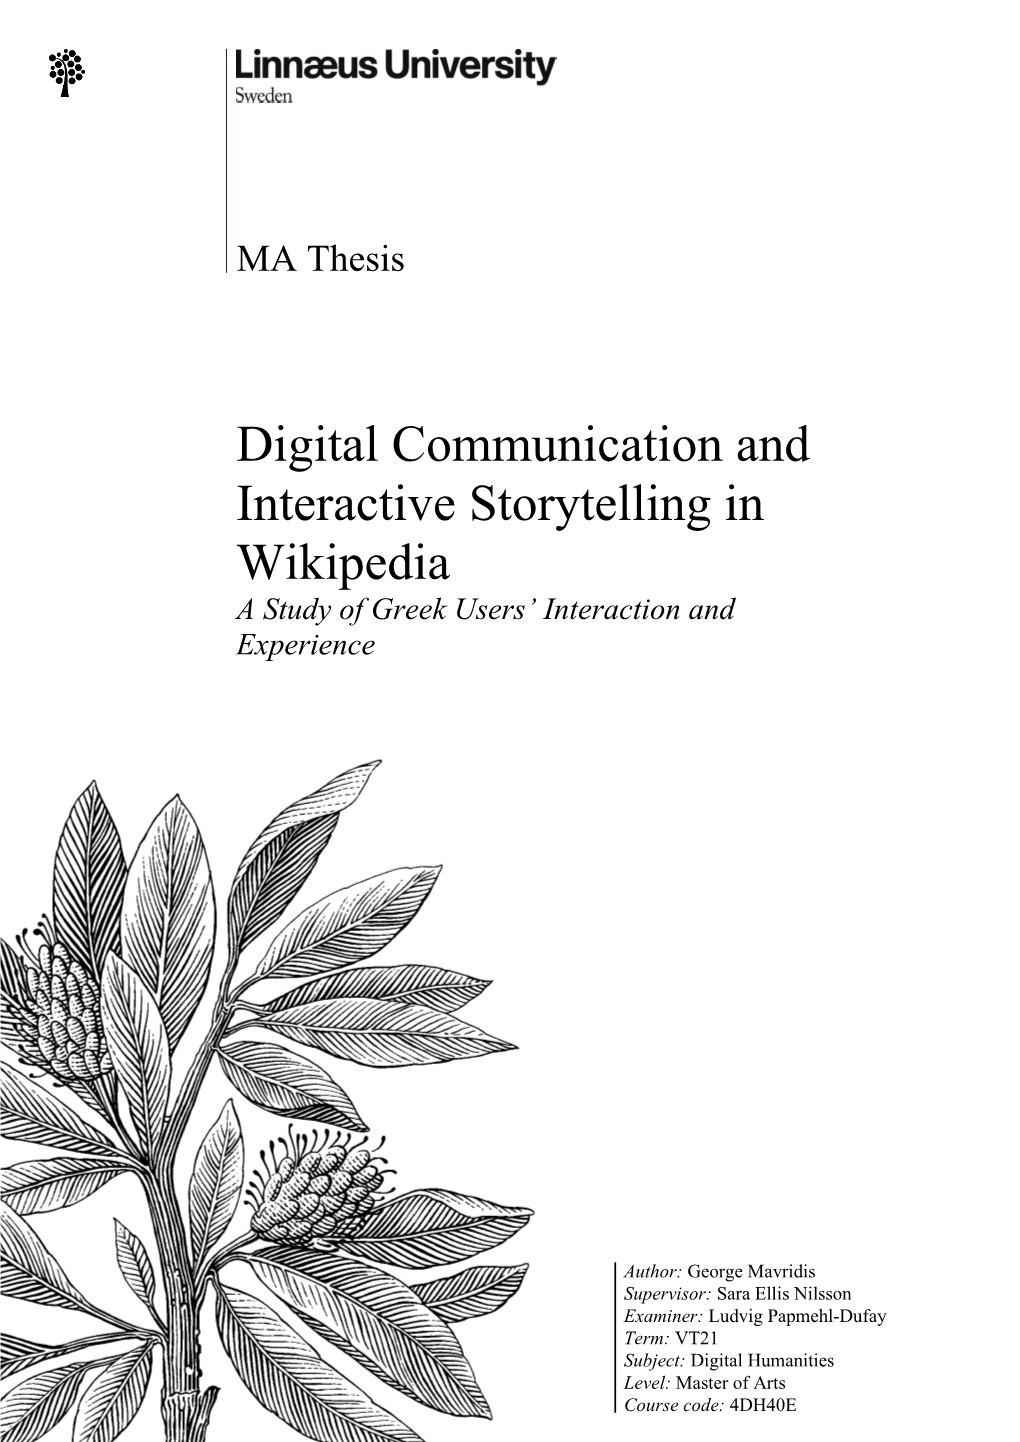 Digital Communication and Interactive Storytelling in Wikipedia